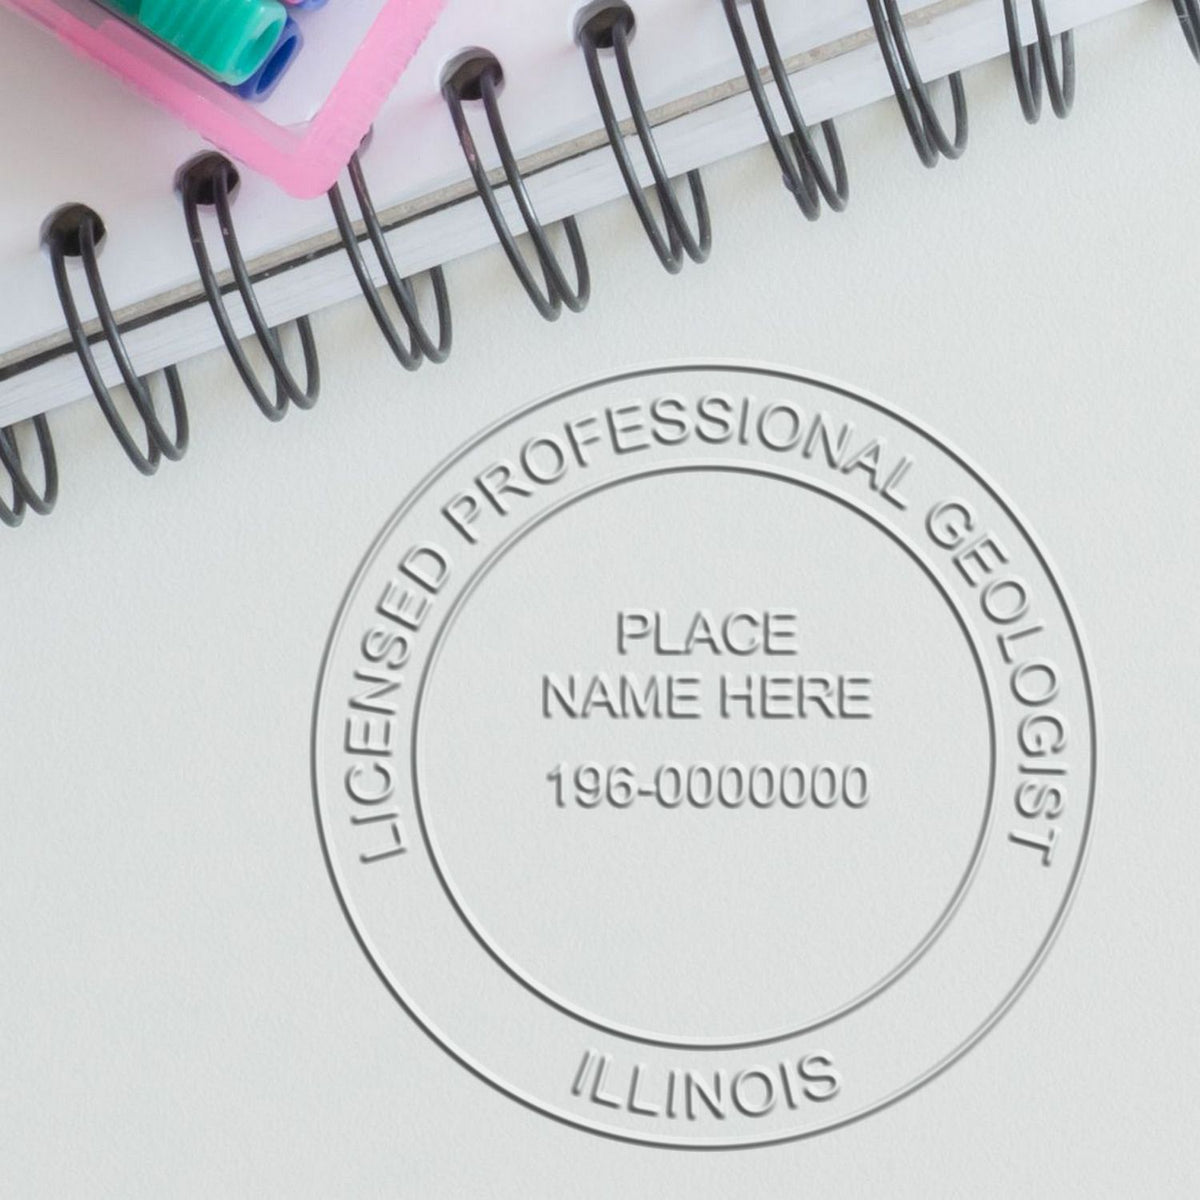 An alternative view of the Handheld Illinois Professional Geologist Embosser stamped on a sheet of paper showing the image in use